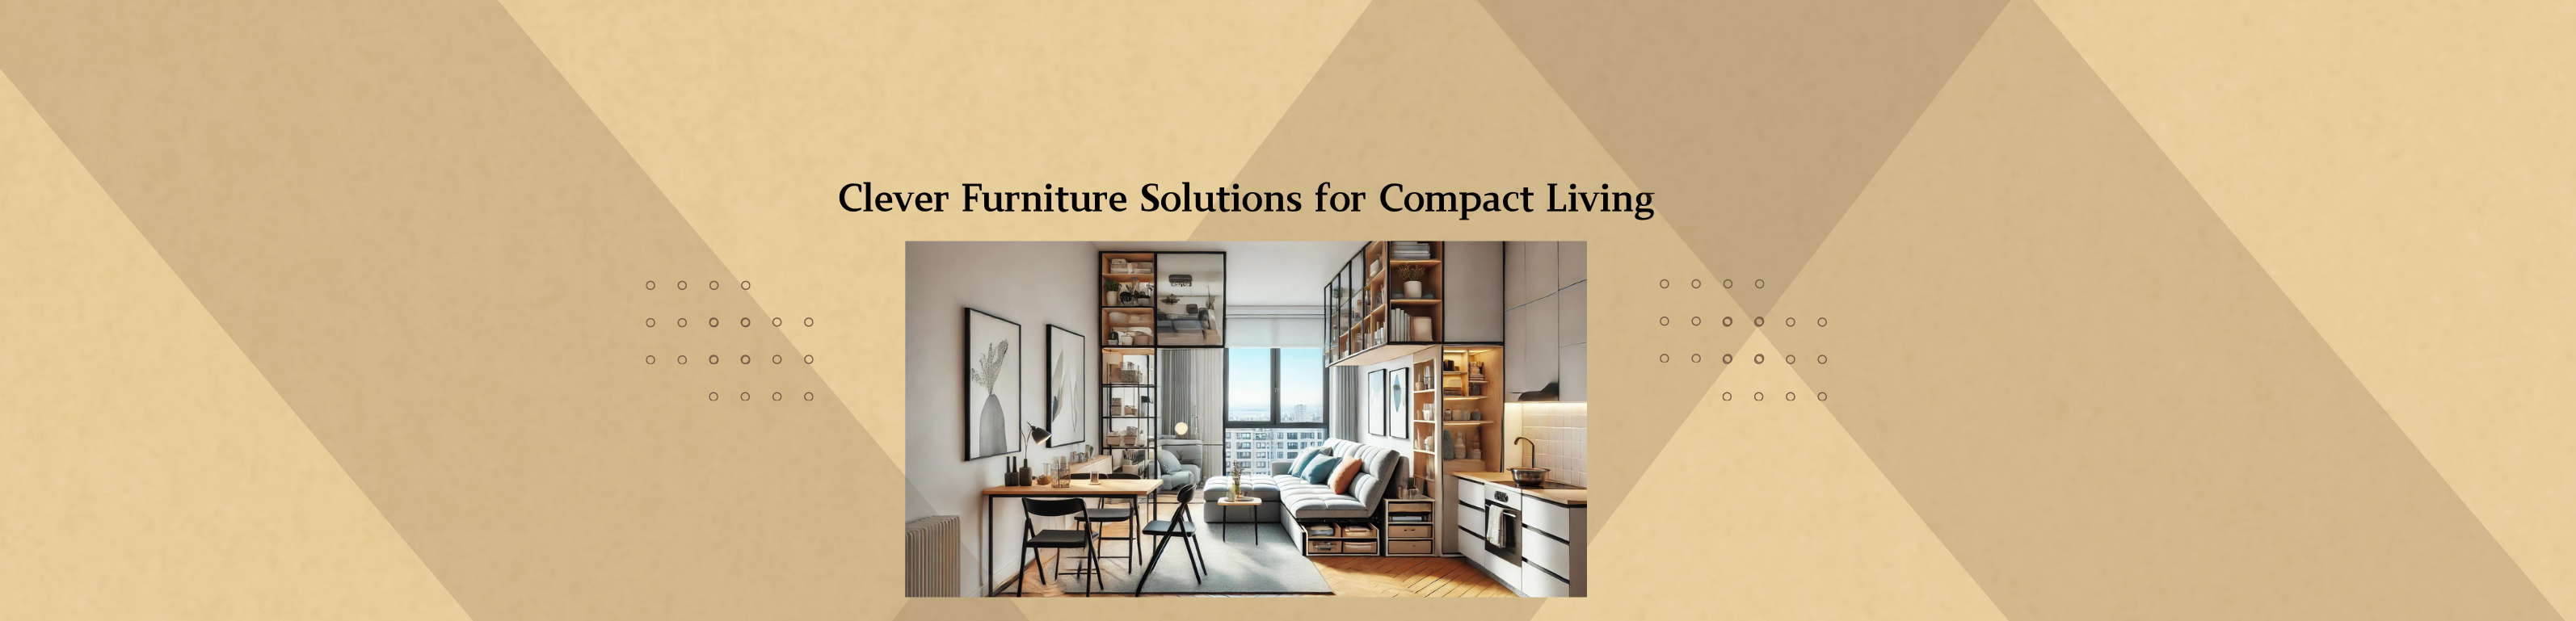 Clever Furniture Solutions for Compact Living